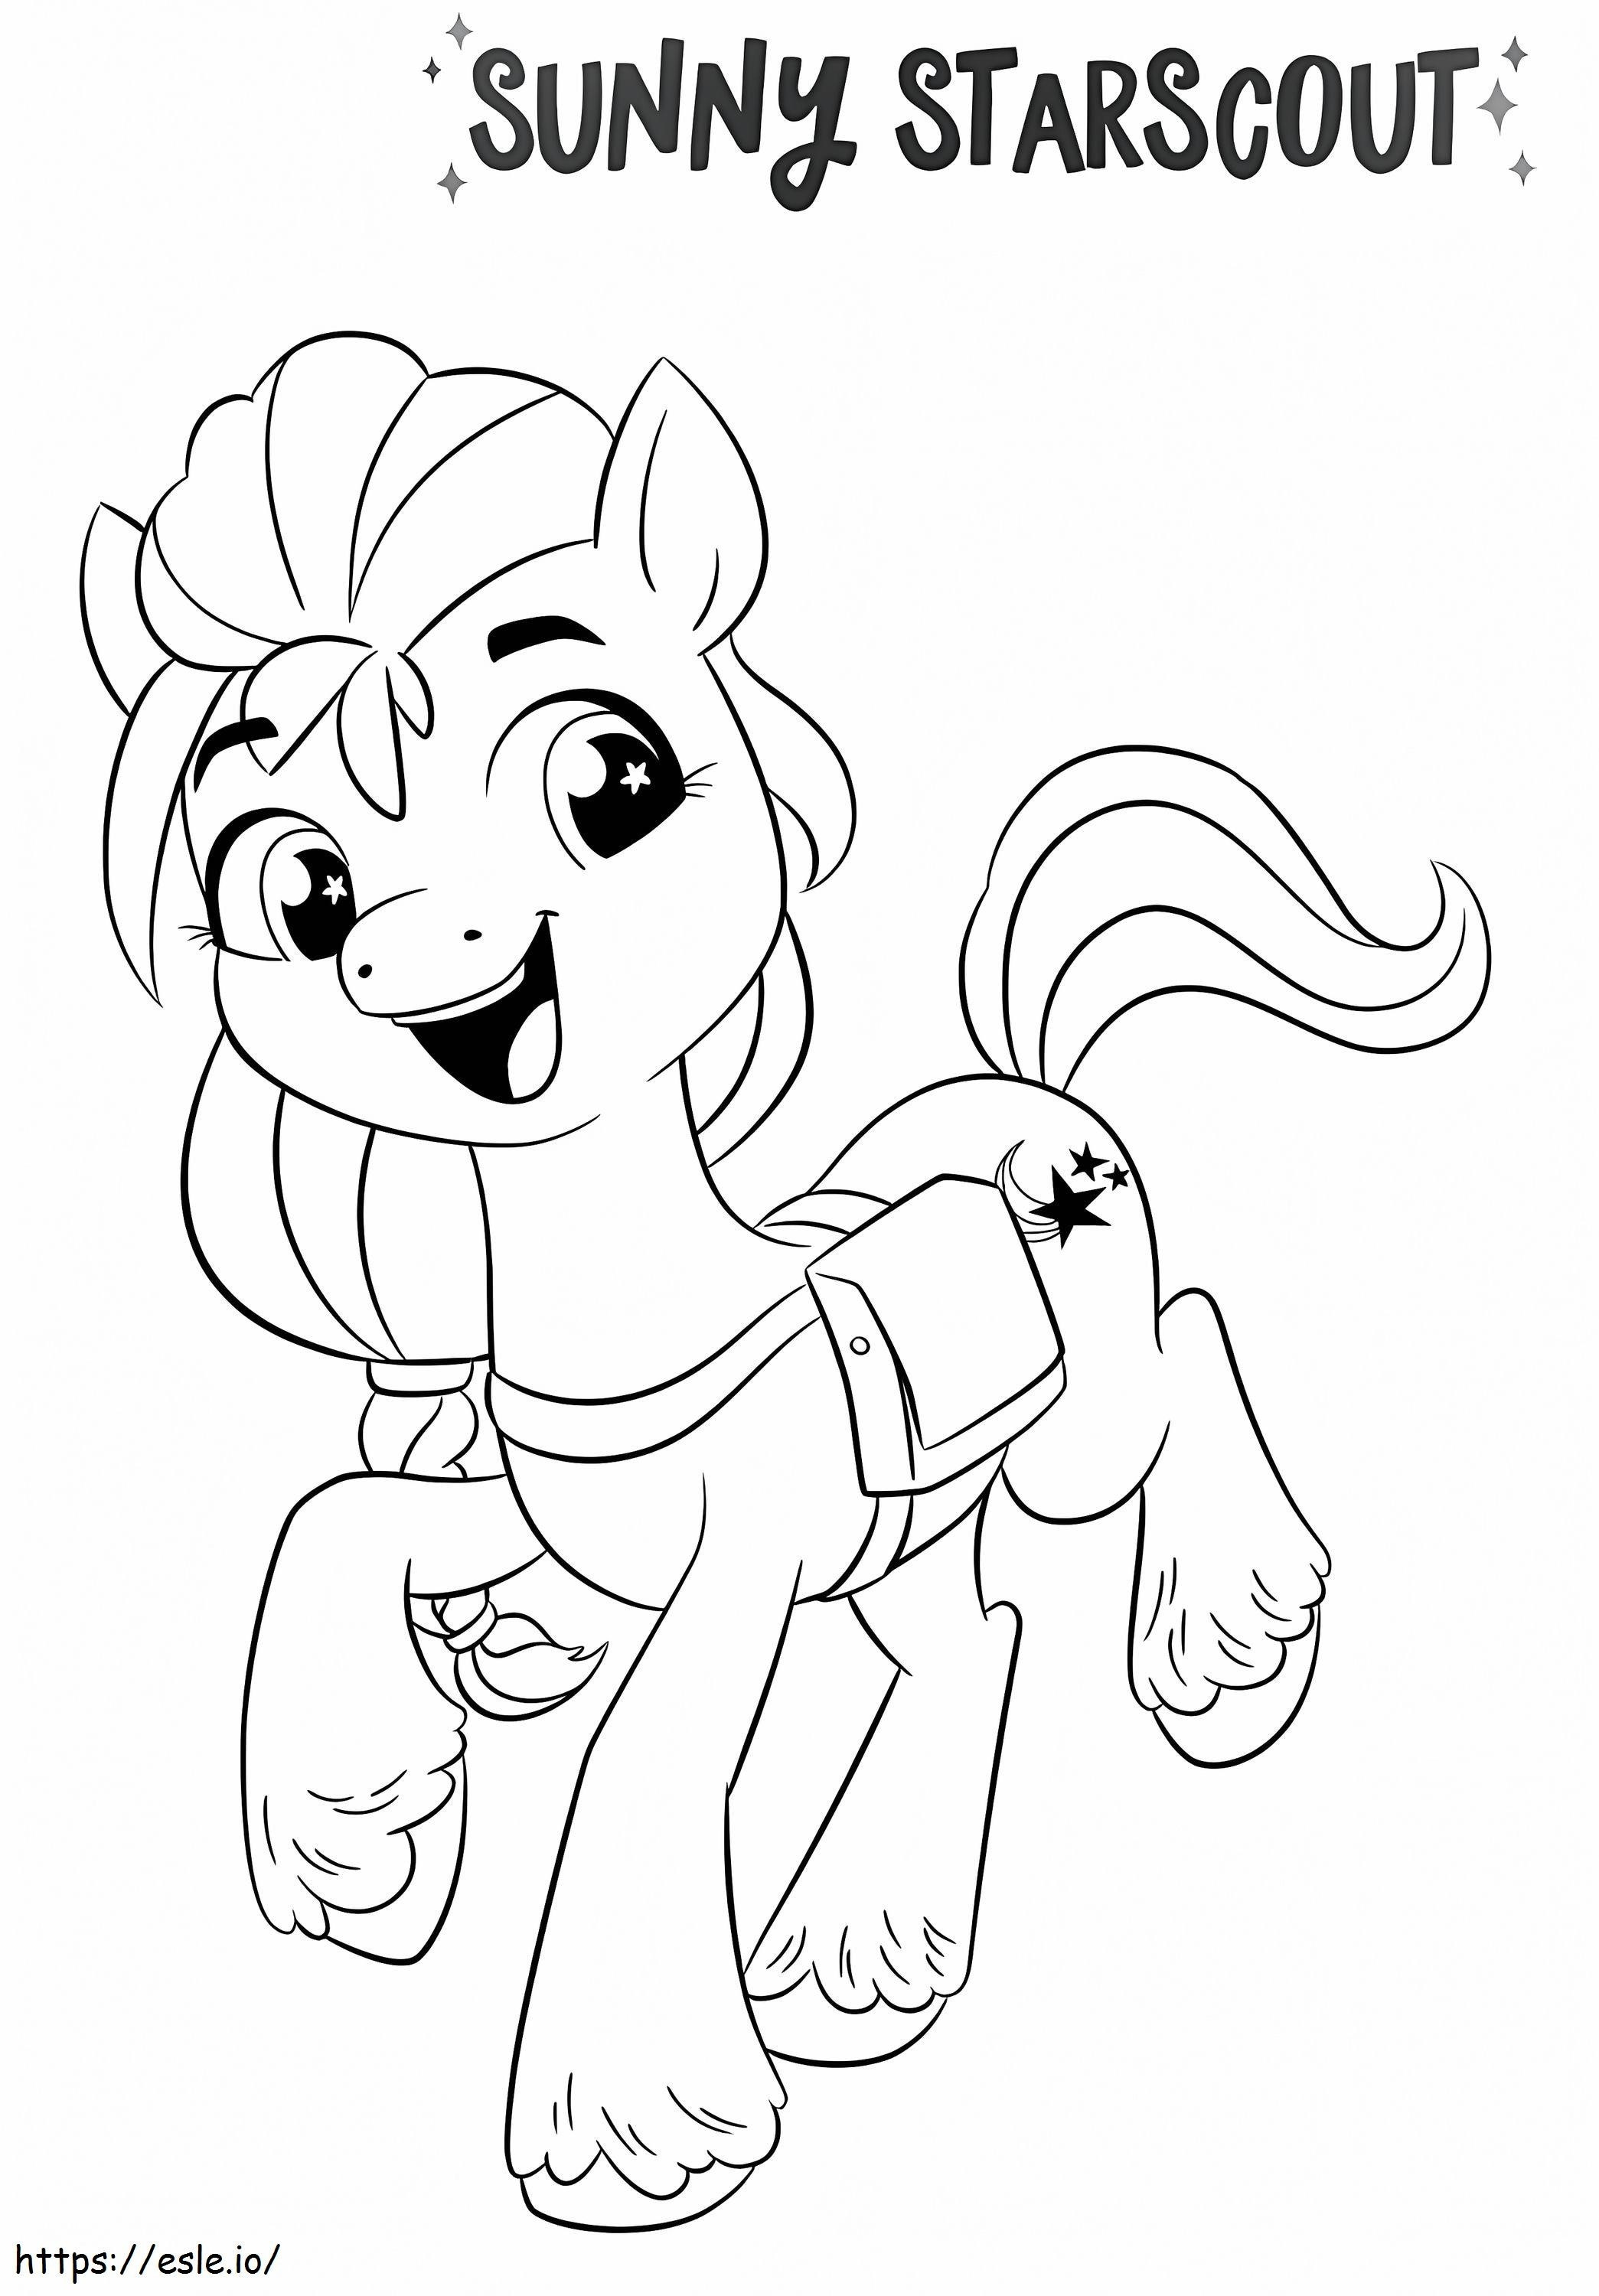 Sunny Starscout coloring page